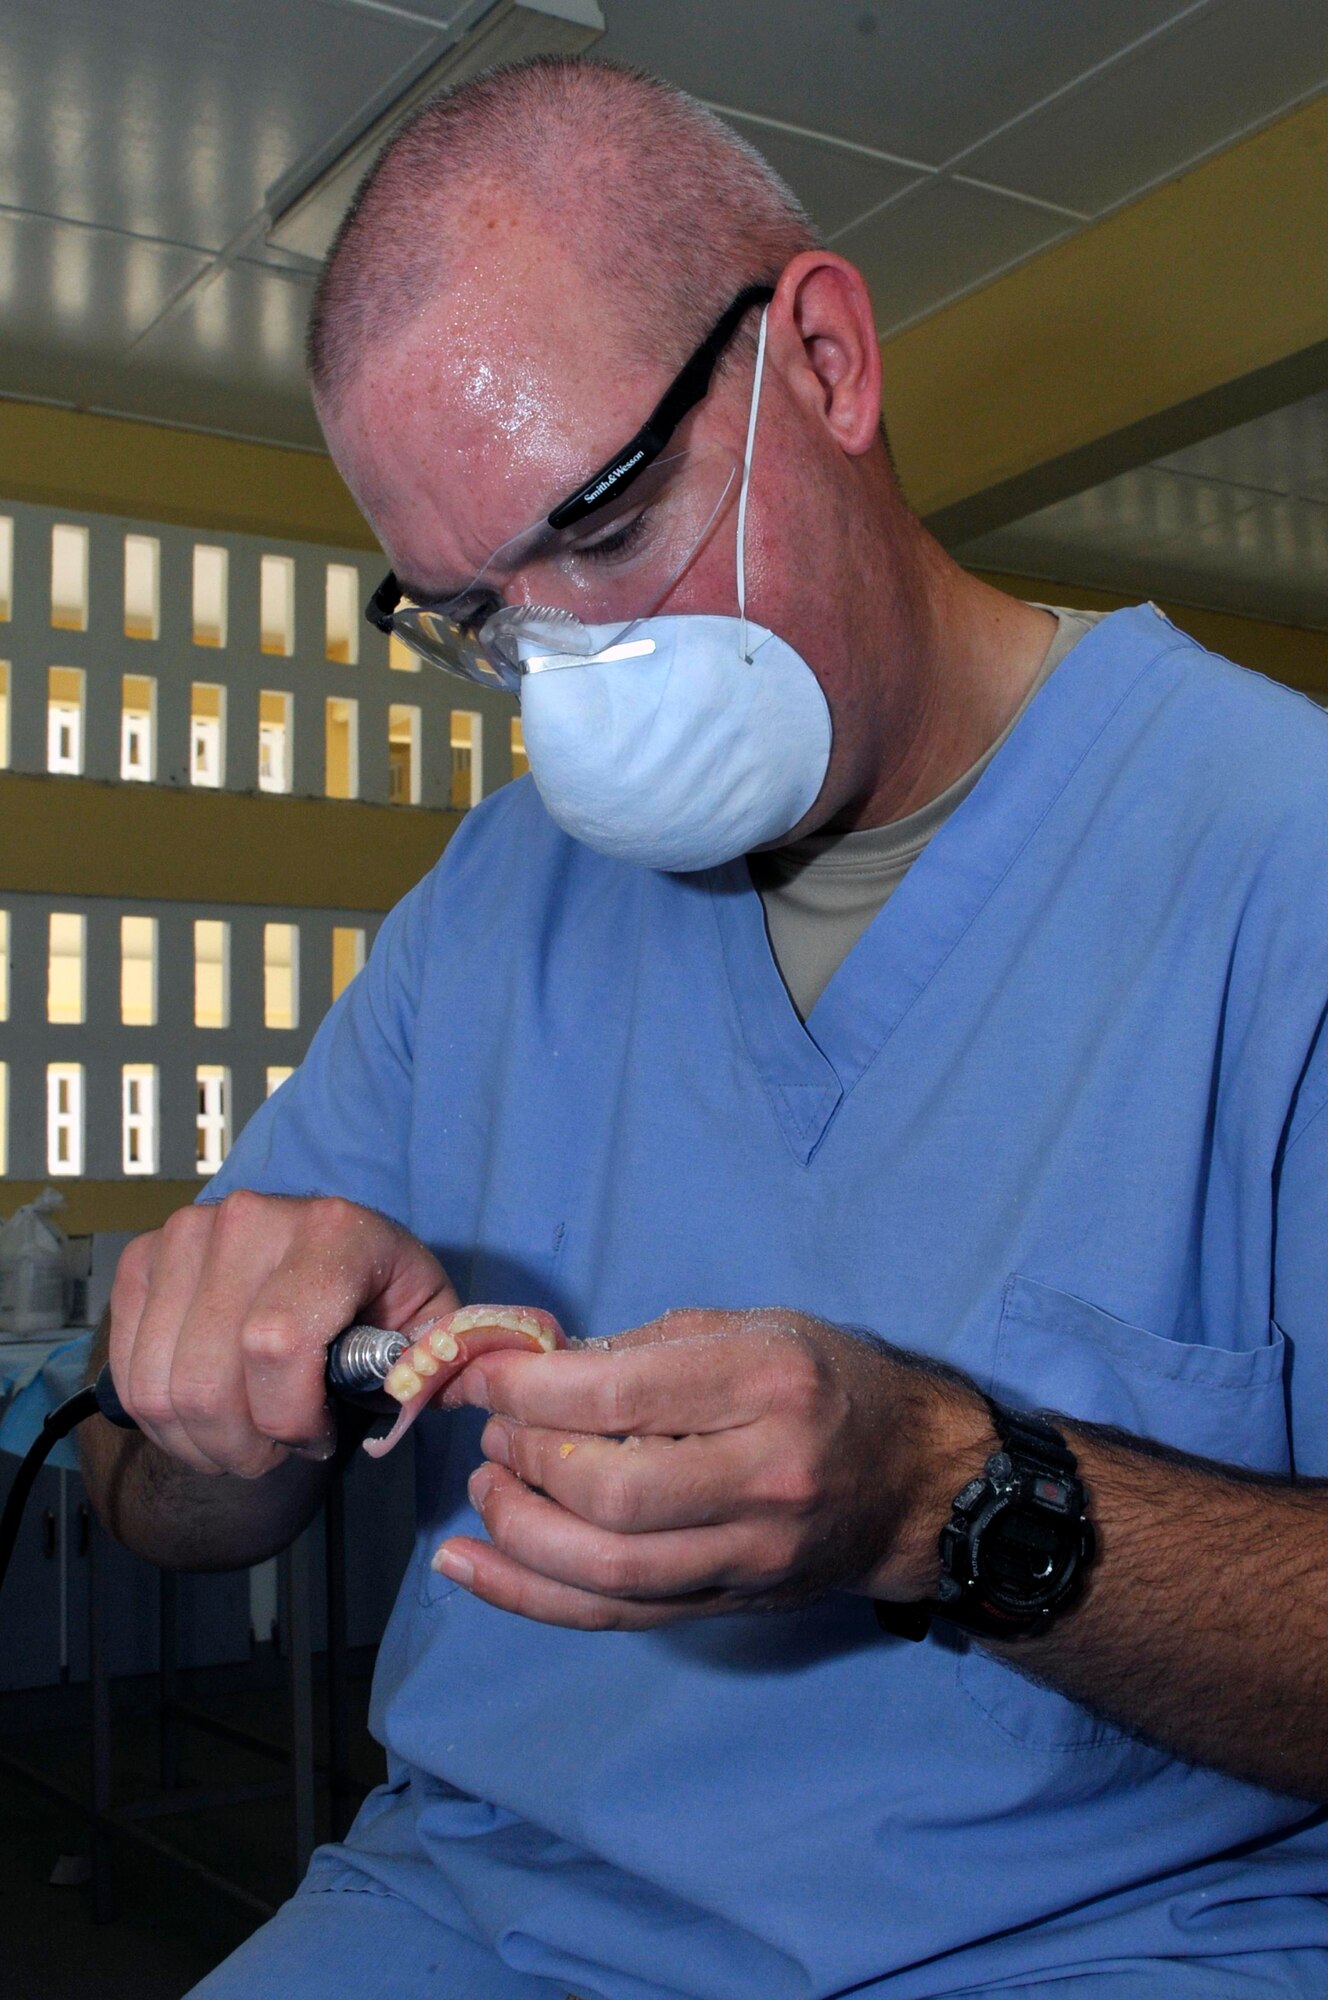 Tech Sgt. Brian Arendes, dental laboratory technician, 75th Dental Squadron, Hill AFB, Utah, rounds of the edges of a new denture with a dremel sander Aug. 25, 2009, at Diamond Secondary School in Georgetown, Guyana. Airmen from Hill AFB are participating in the third and final dental rotation for New Horizons Guyana 2009. (U.S. Air Force photo by Airman 1st Class Perry Aston) (Released)